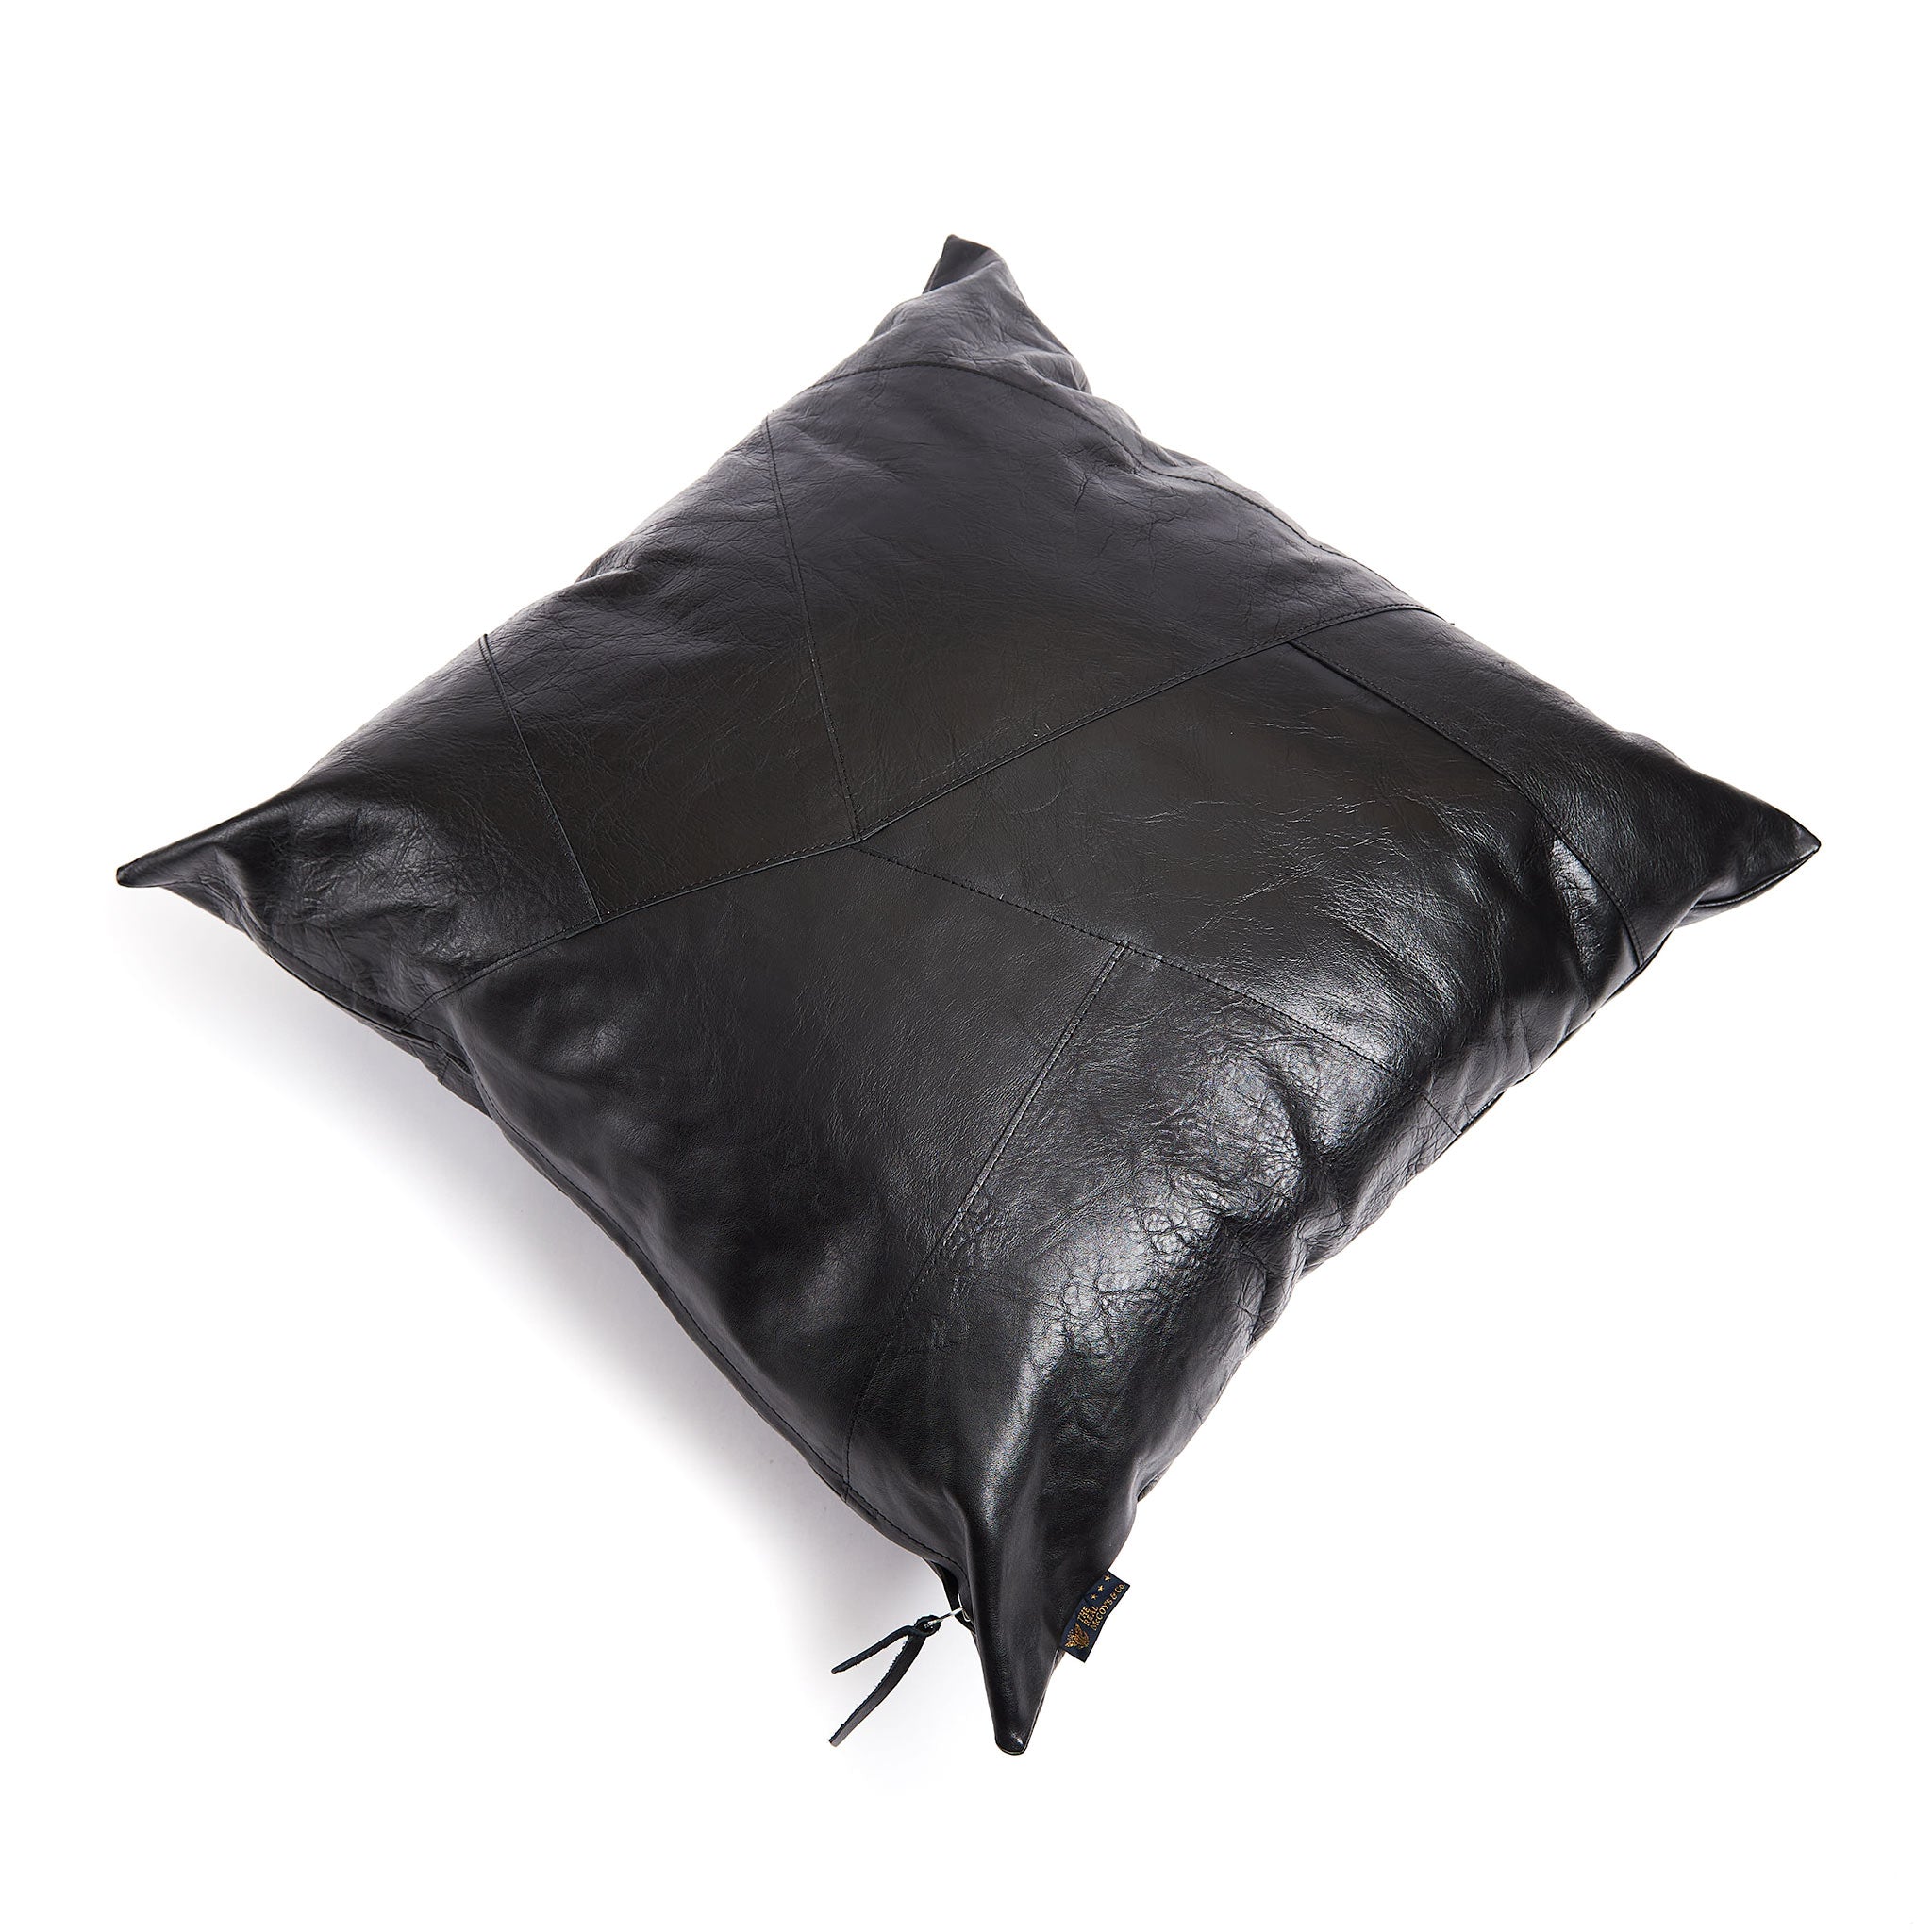 The Real McCoy's MW18101 Horsehide Cushion (Large) Black Side